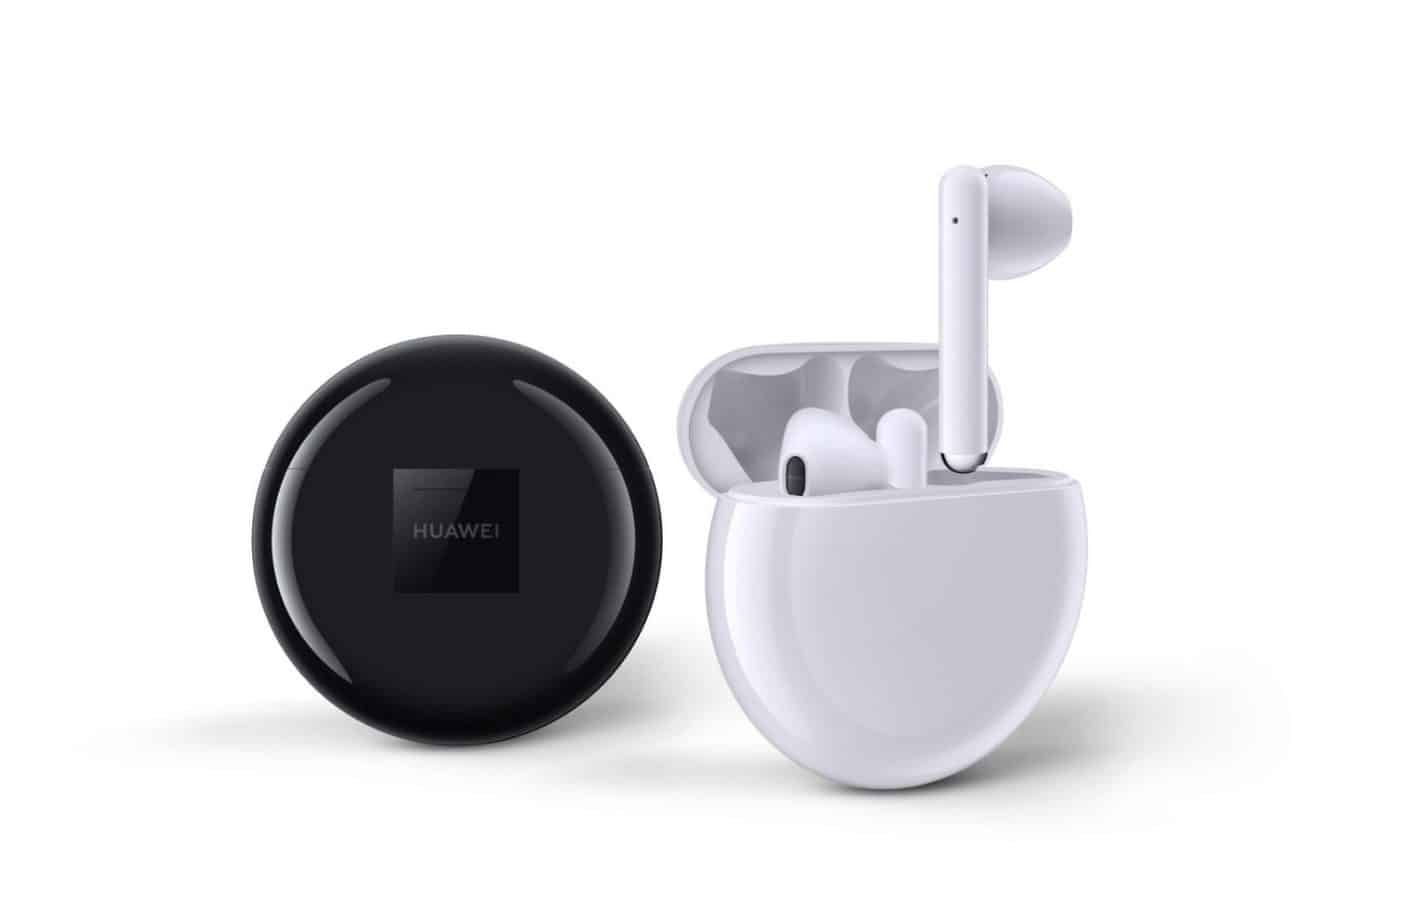 Huawei FreeBuds 3 true wireless earbuds is slightly cheaper than AirPods at $197